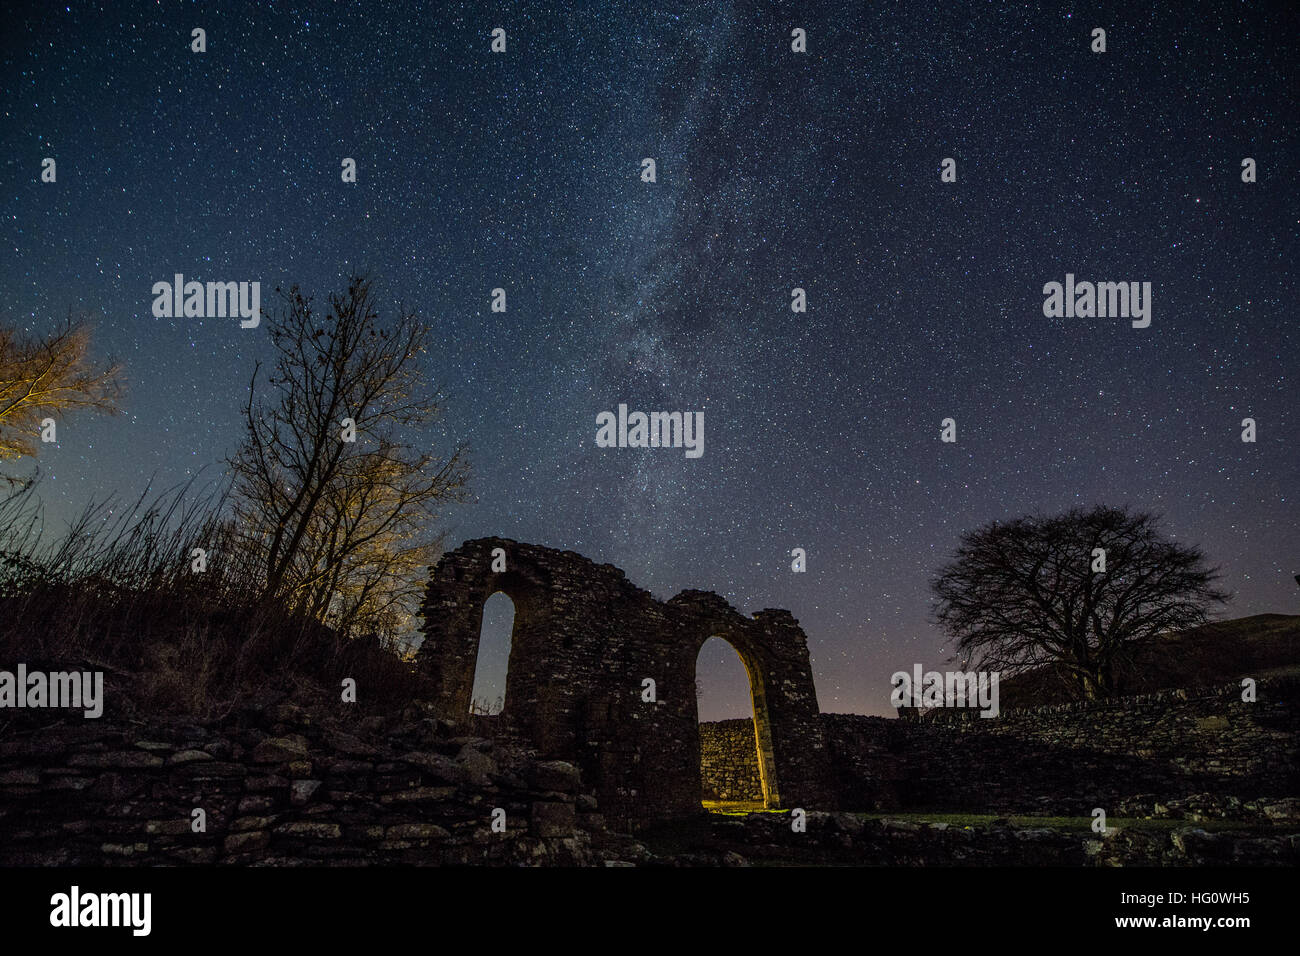 The Milky Way over Wales UK: On a cold clear and frosty night, with temperatures dropping to minus 5º celsius, the Milky Way is clearly seen as a thick band of stars across the skies above the arch shaped ruins of the medieval Strata Florida (Ystrad Fflur) Cistercian abbey in Pontrhydfendigaid, Ceredigion, mid Wales photo © keith morris/Alamy Live News Stock Photo